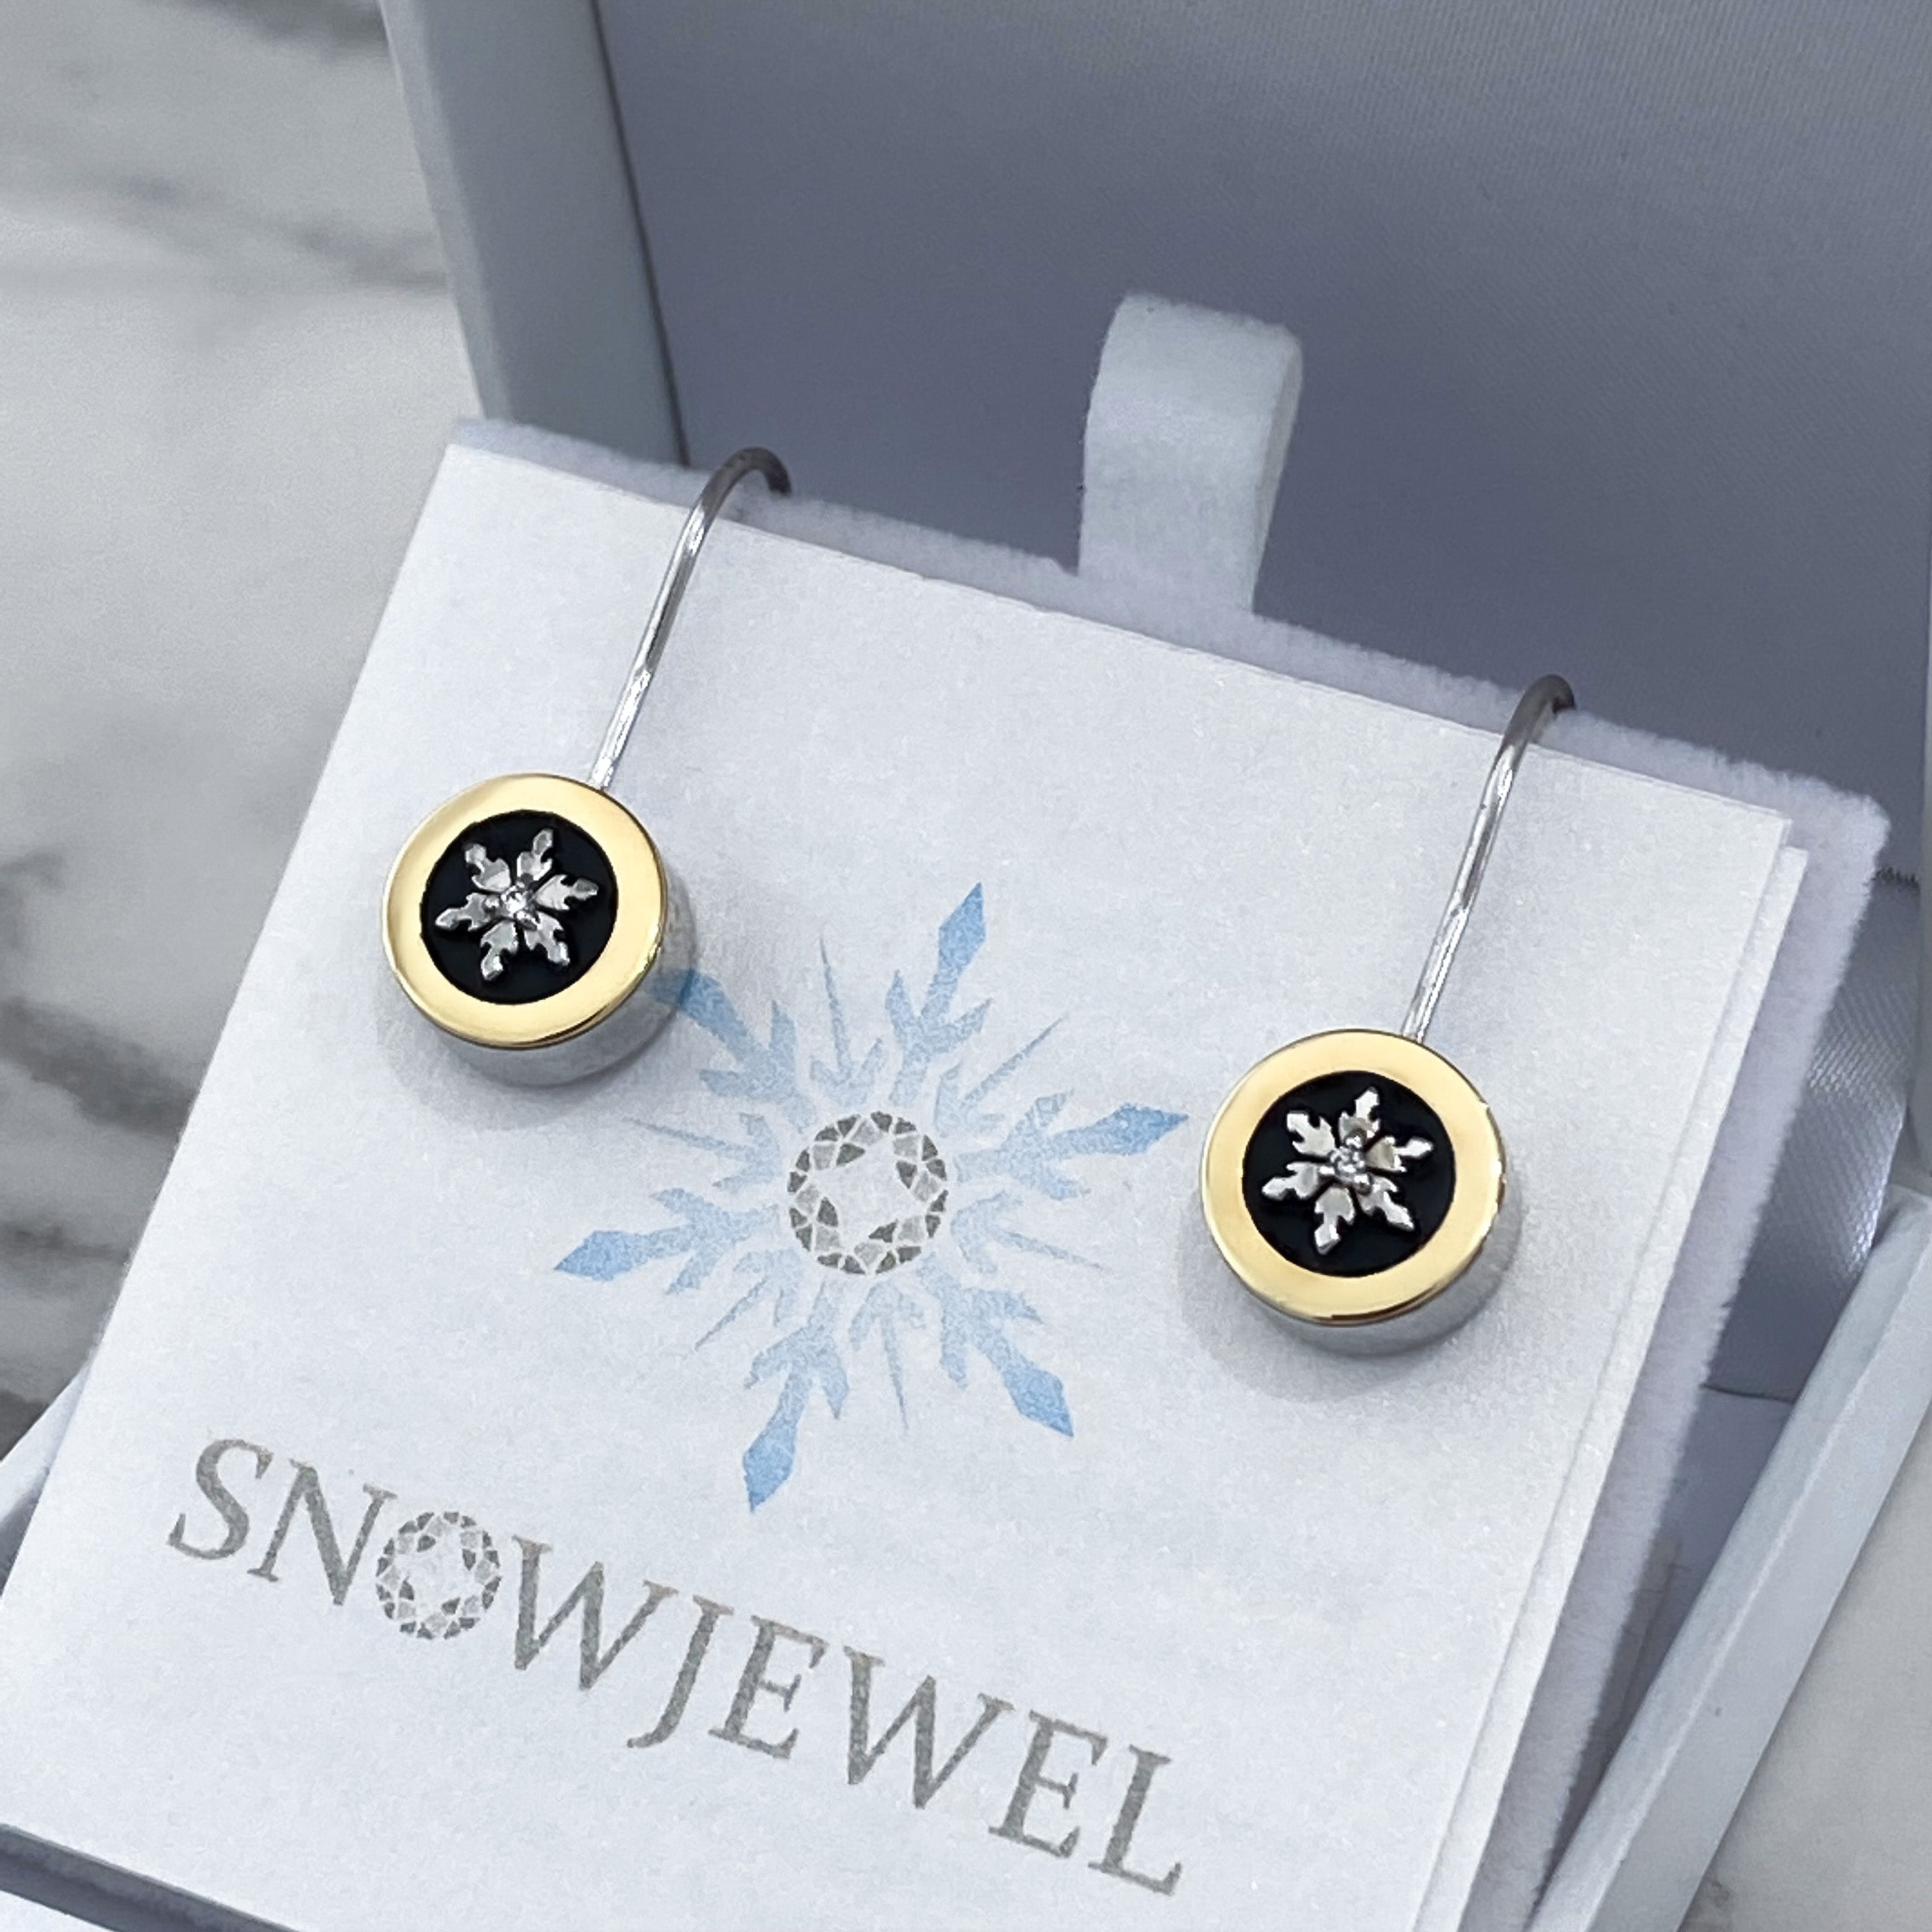 Snowflake Earrings in Silver, Yellow Gold and Diamond Frosting 2